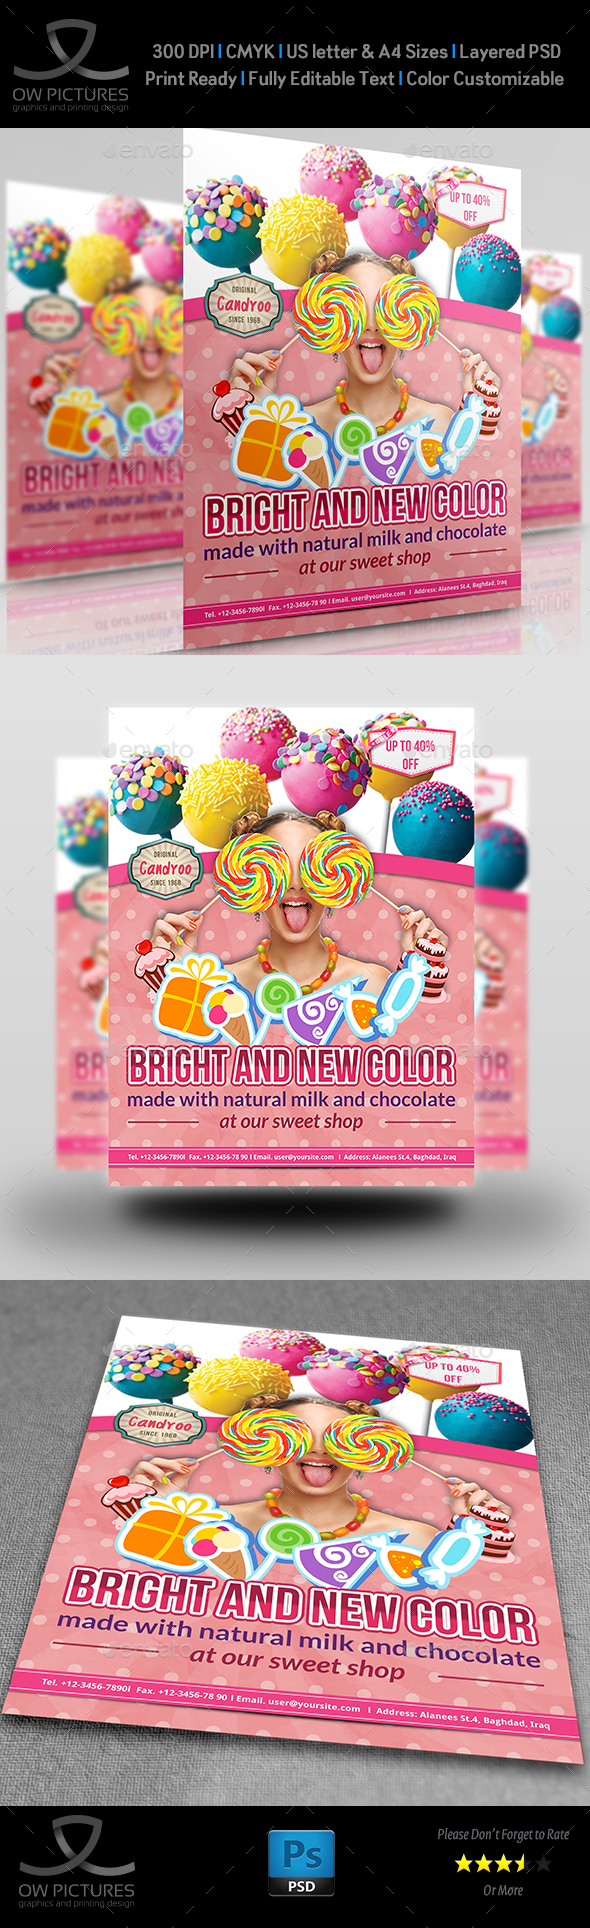 Candy Flyer Template by OWPictures GraphicRiver